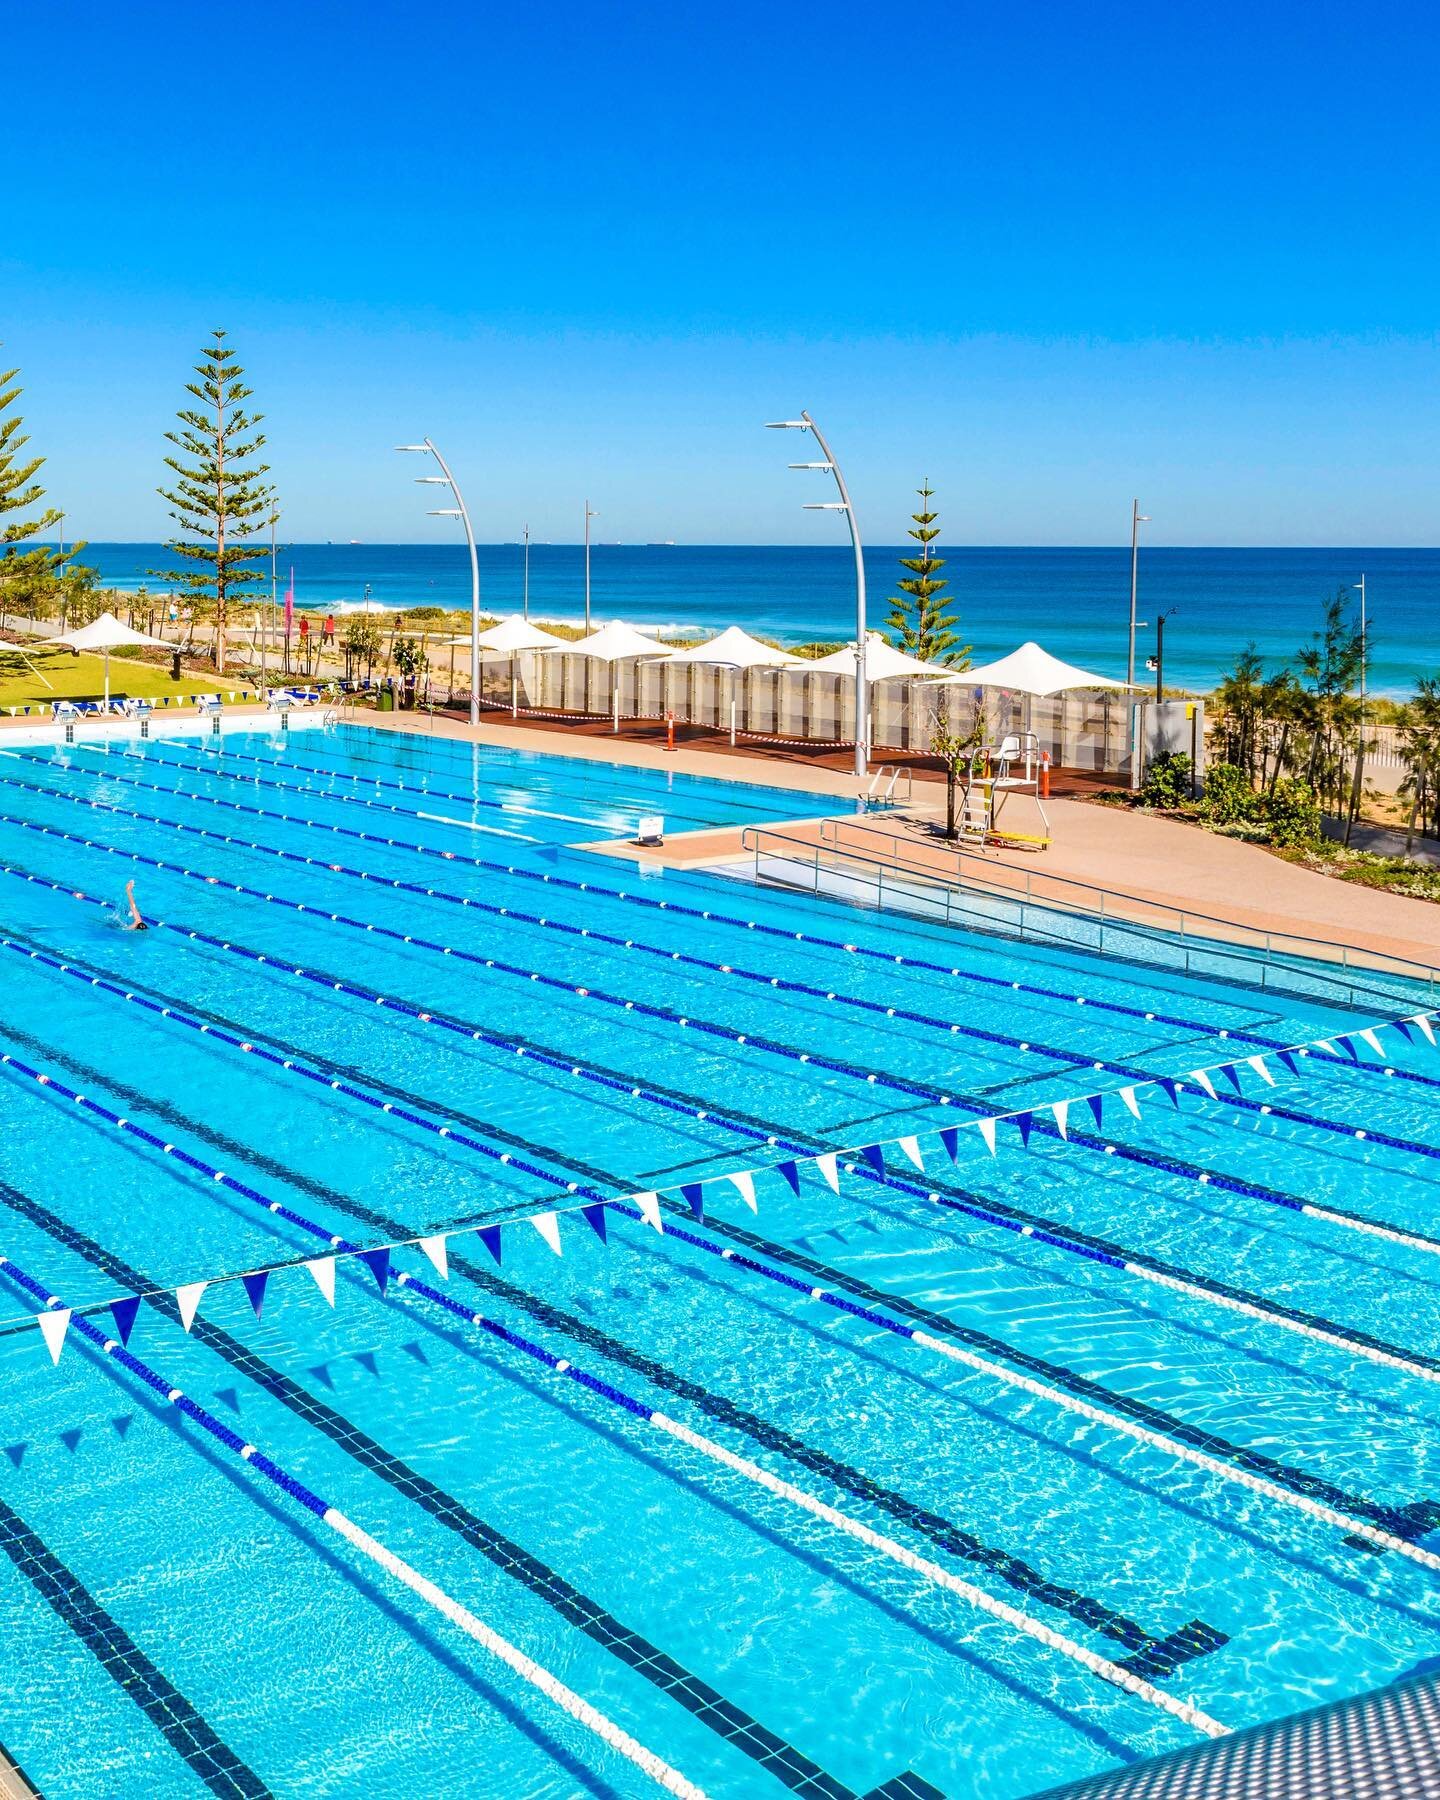 Dream for every swimmer, having a workout next to the Ocean 😍 🏝 🏊&zwj;♂️ Scarborough Beach Pool in Western Australia is an aquatic facility offering the combo of geo-thermally heated 50 metres and 25-metre pool 🇦🇺
.
.
#swimvenue #swimming #swimm